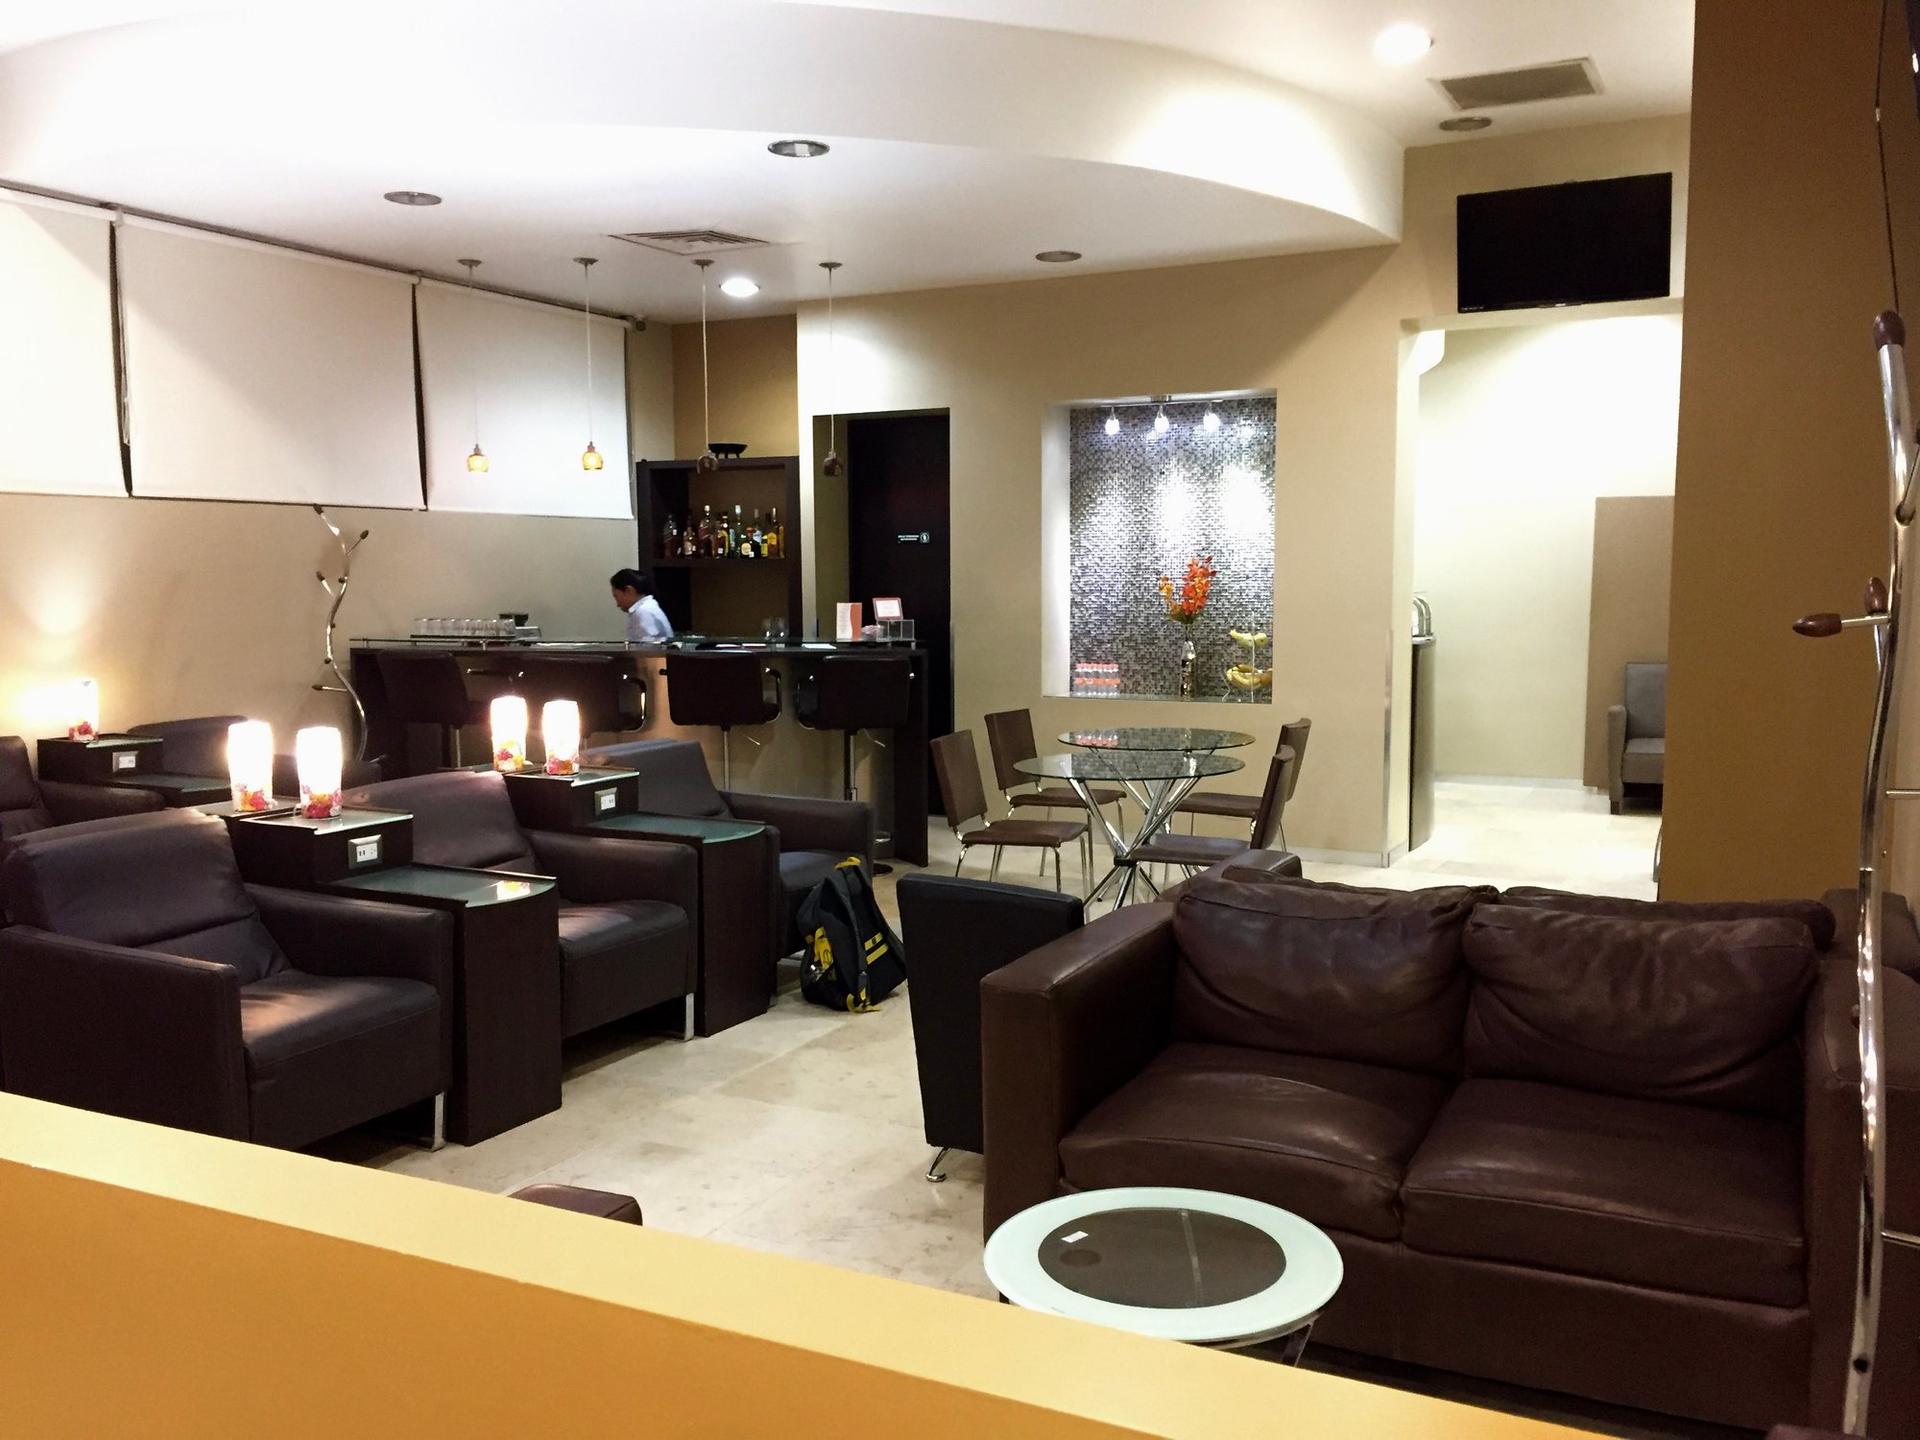 Caral VIP Lounge image 1 of 10